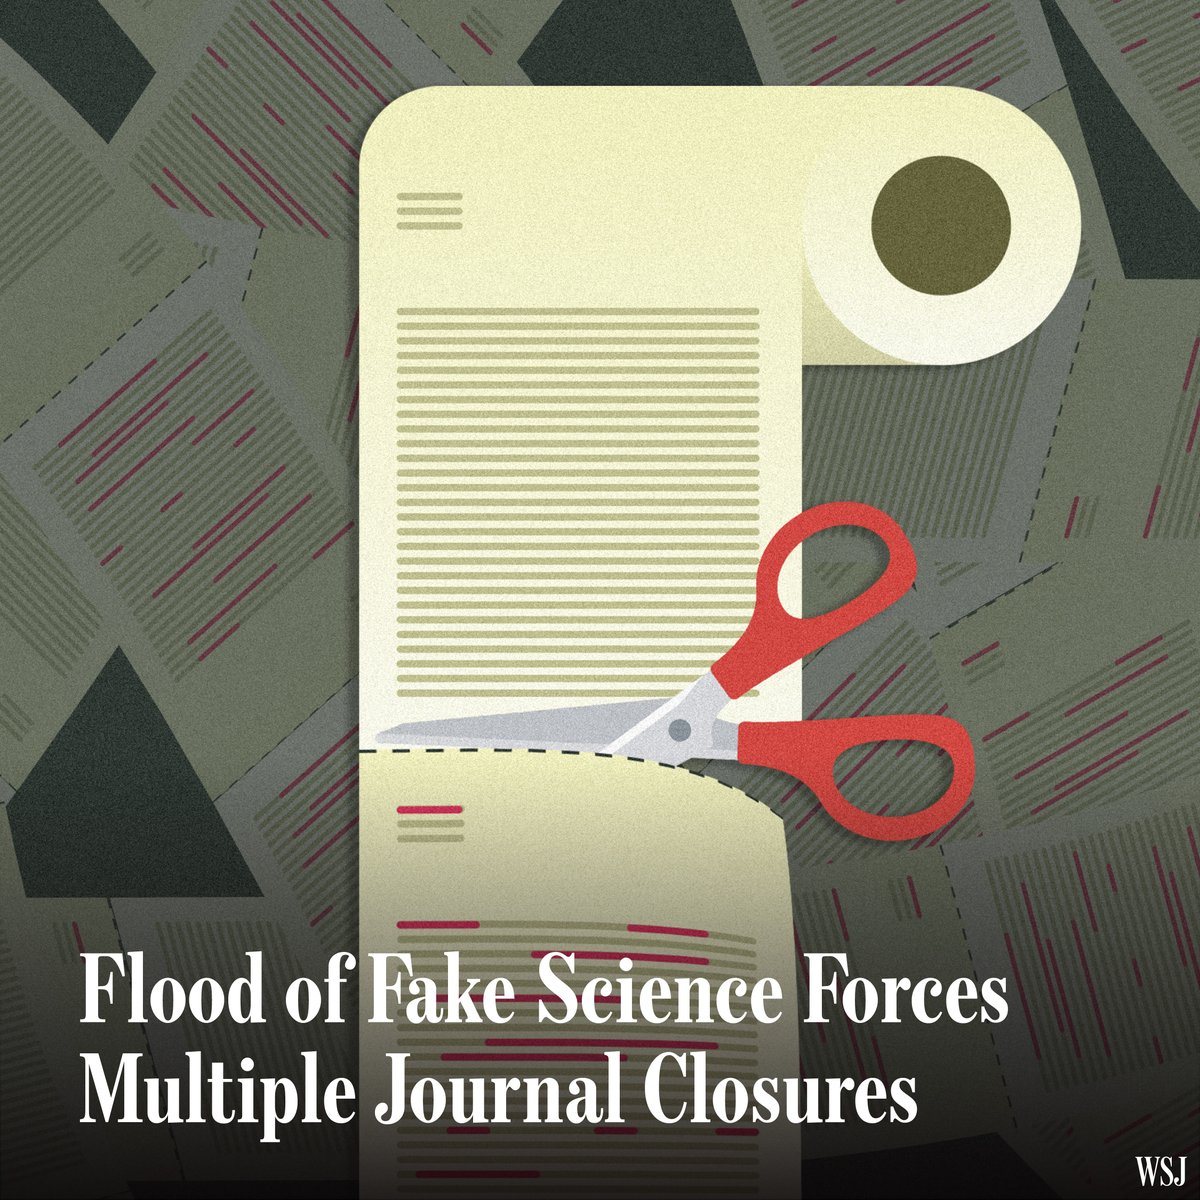 Fake academic studies are turning the publishing industry on its head—forcing publishers to issue retractions and close journals. They are losing millions of dollars. 

Read our exclusive about the large-scale research fraud. 🔗on.wsj.com/4agawuh